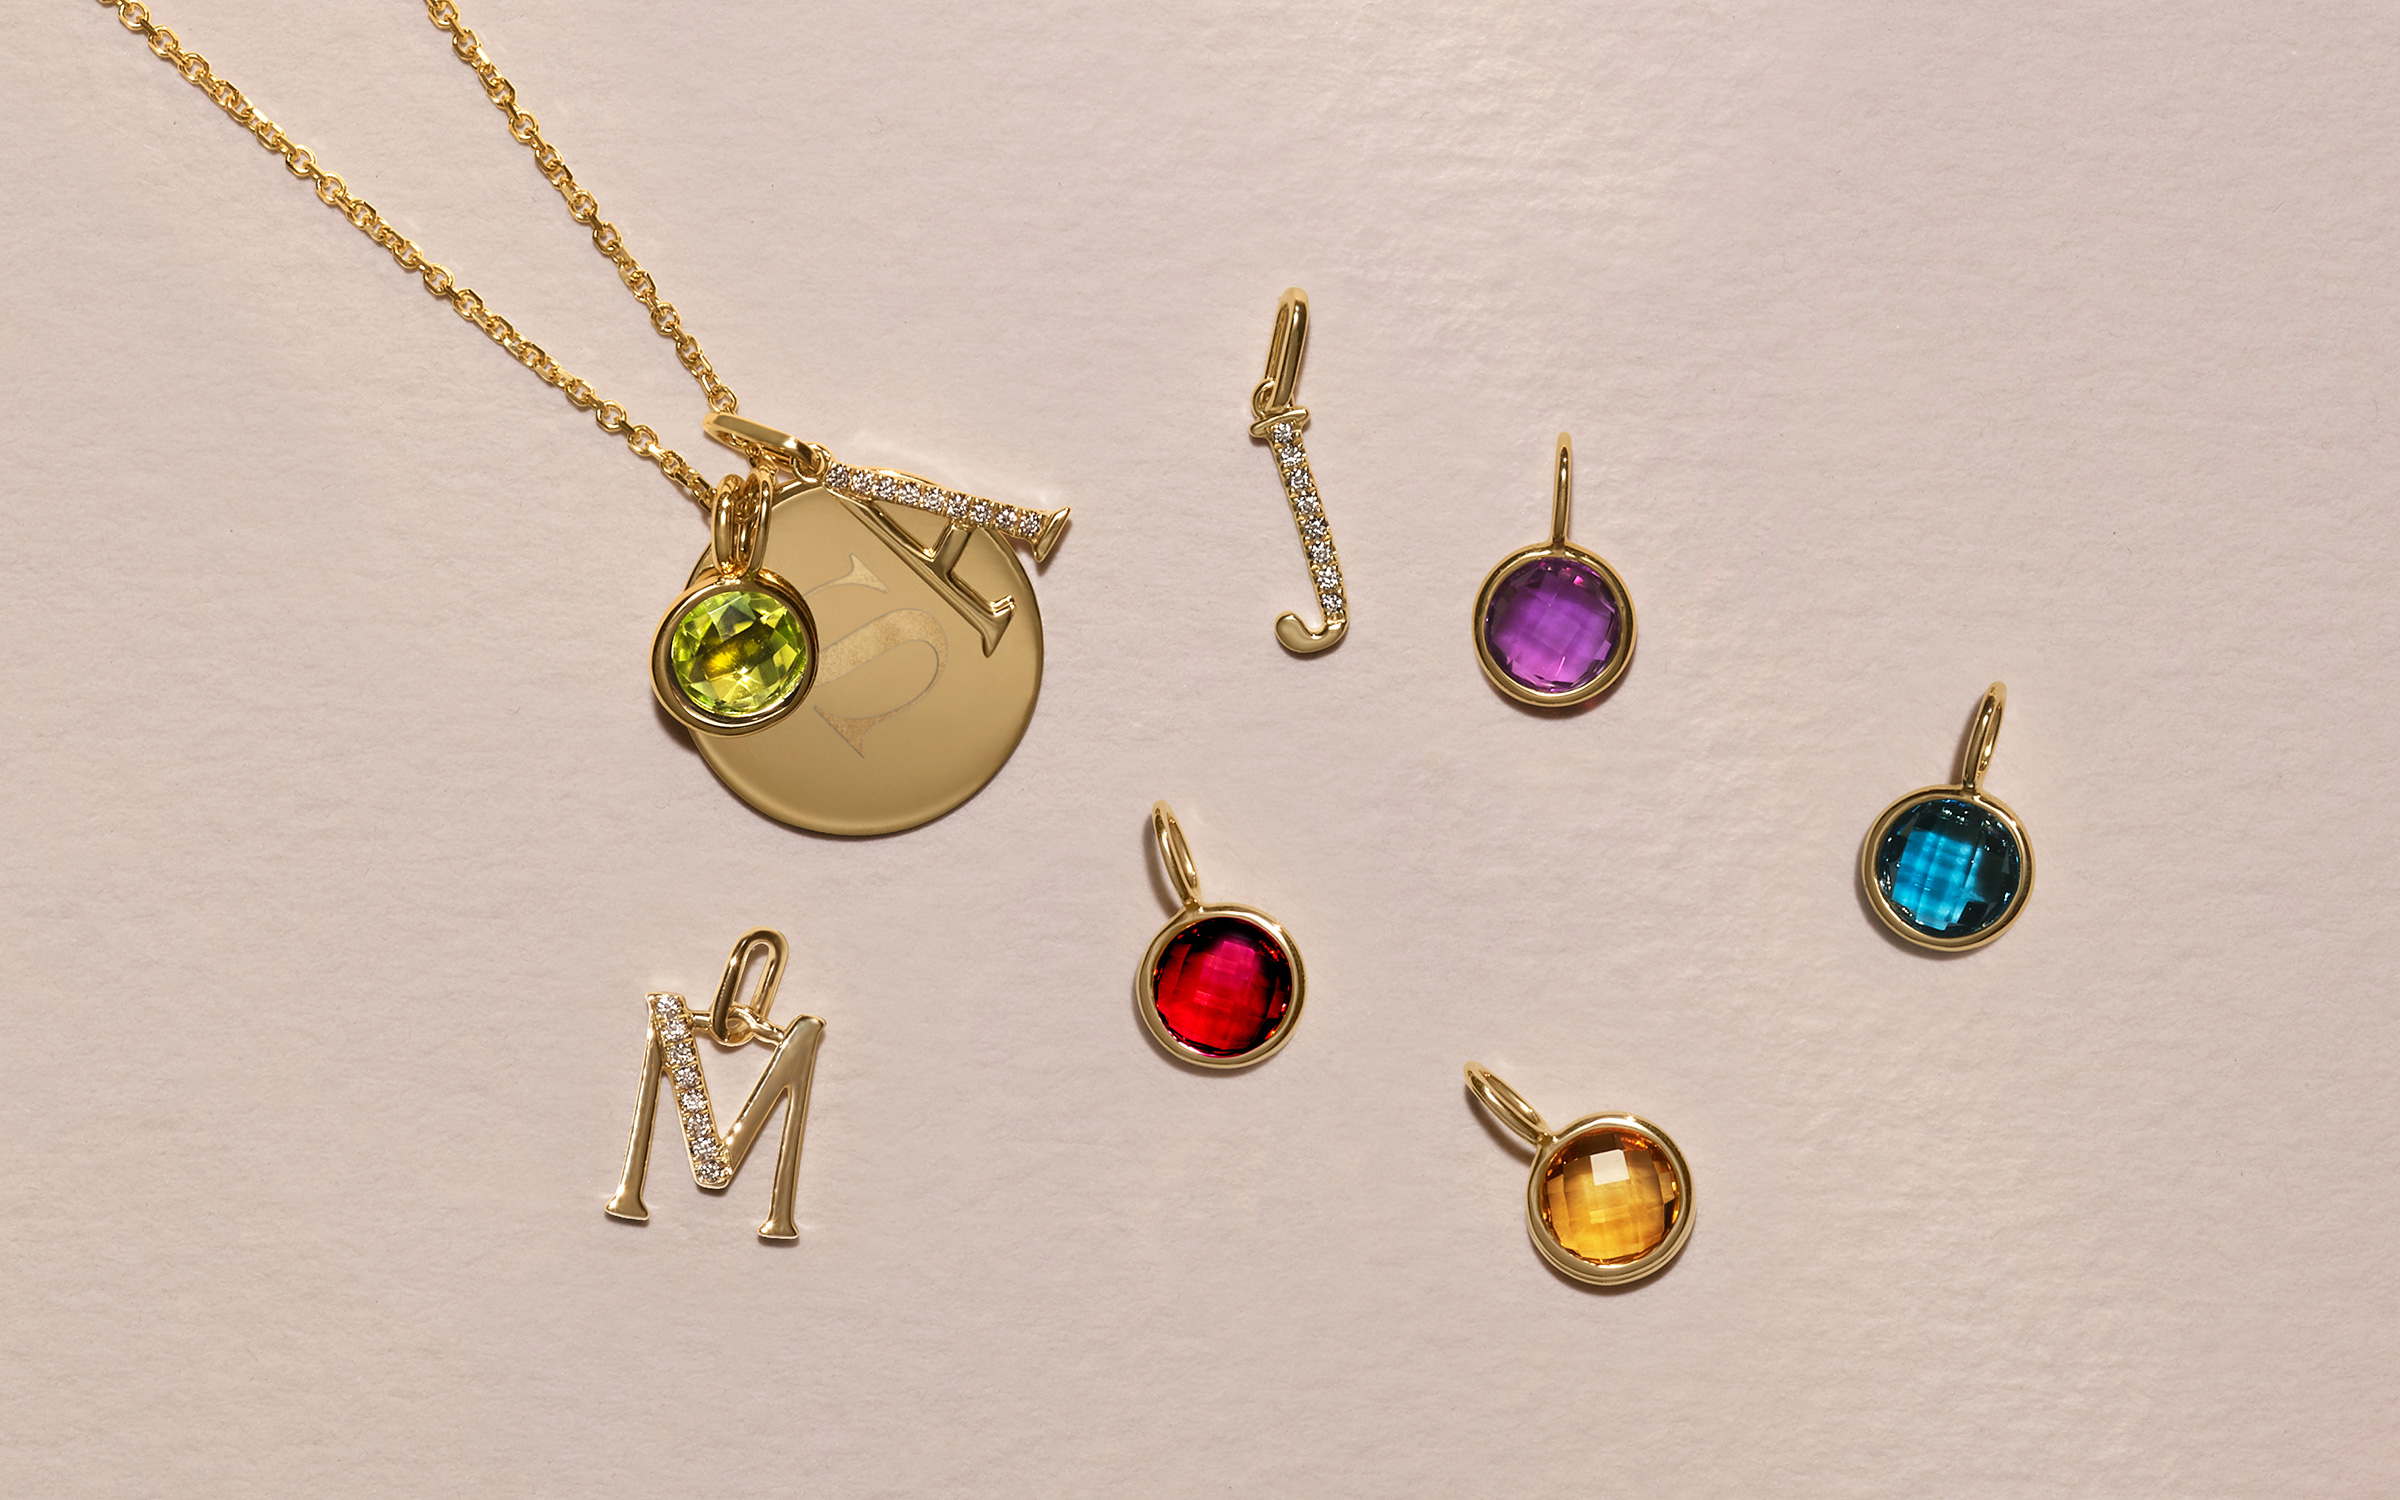 Engraved 14k gold pendant, 14k gold initial pendants, and gemstone charms.